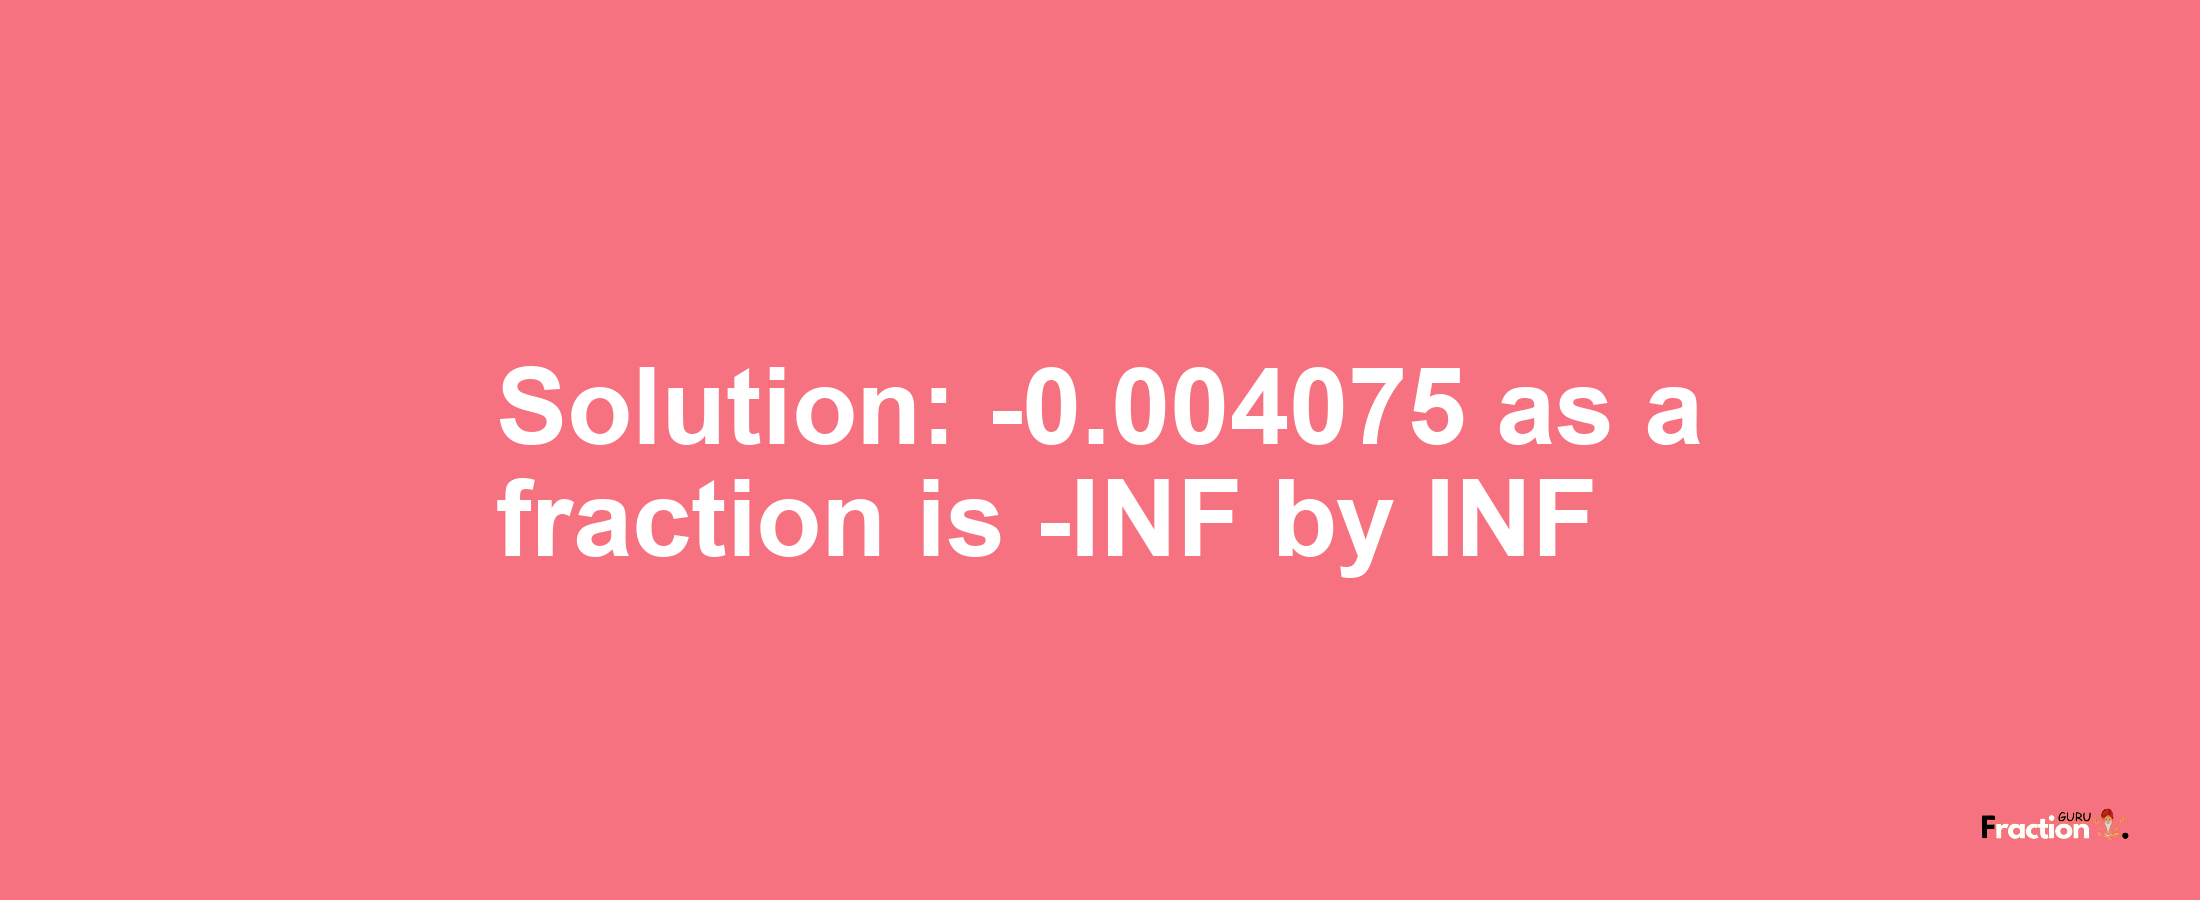 Solution:-0.004075 as a fraction is -INF/INF